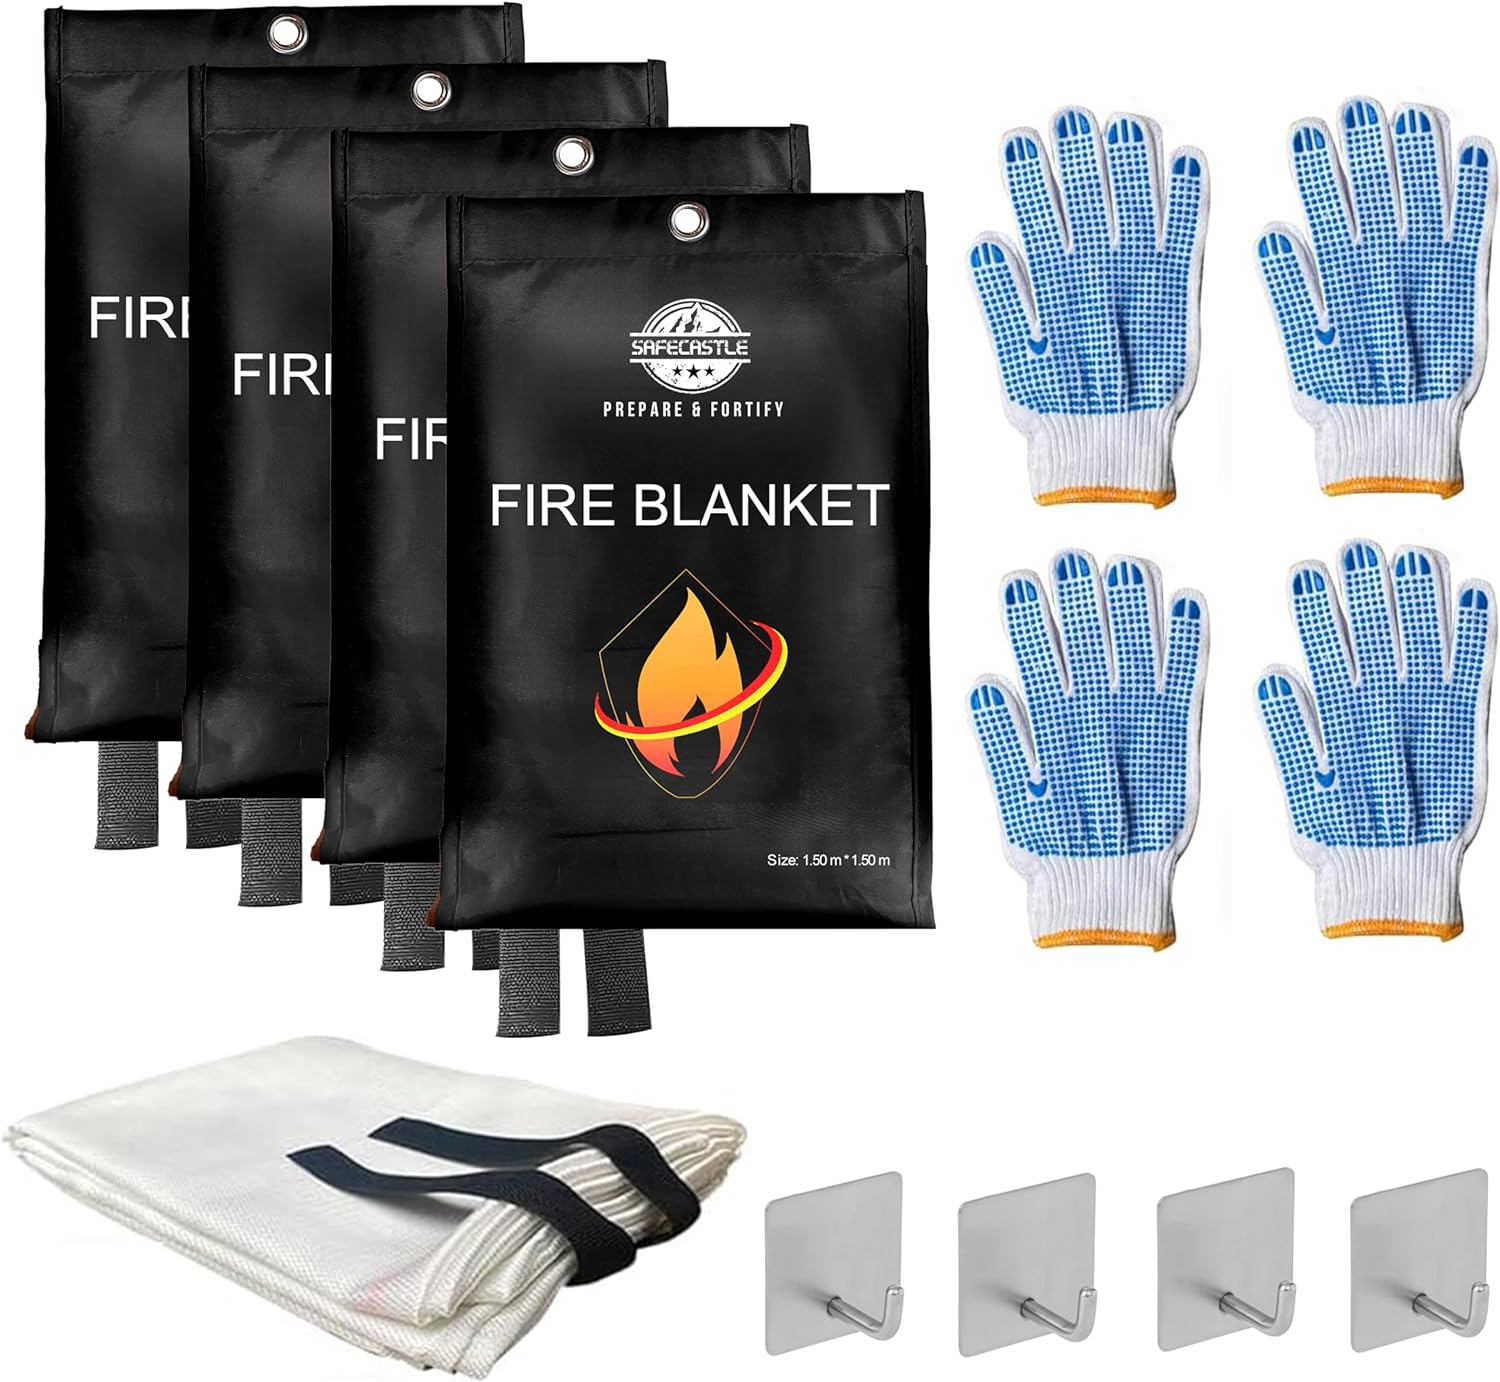 Fire Blanket Saves Lives – AI Force